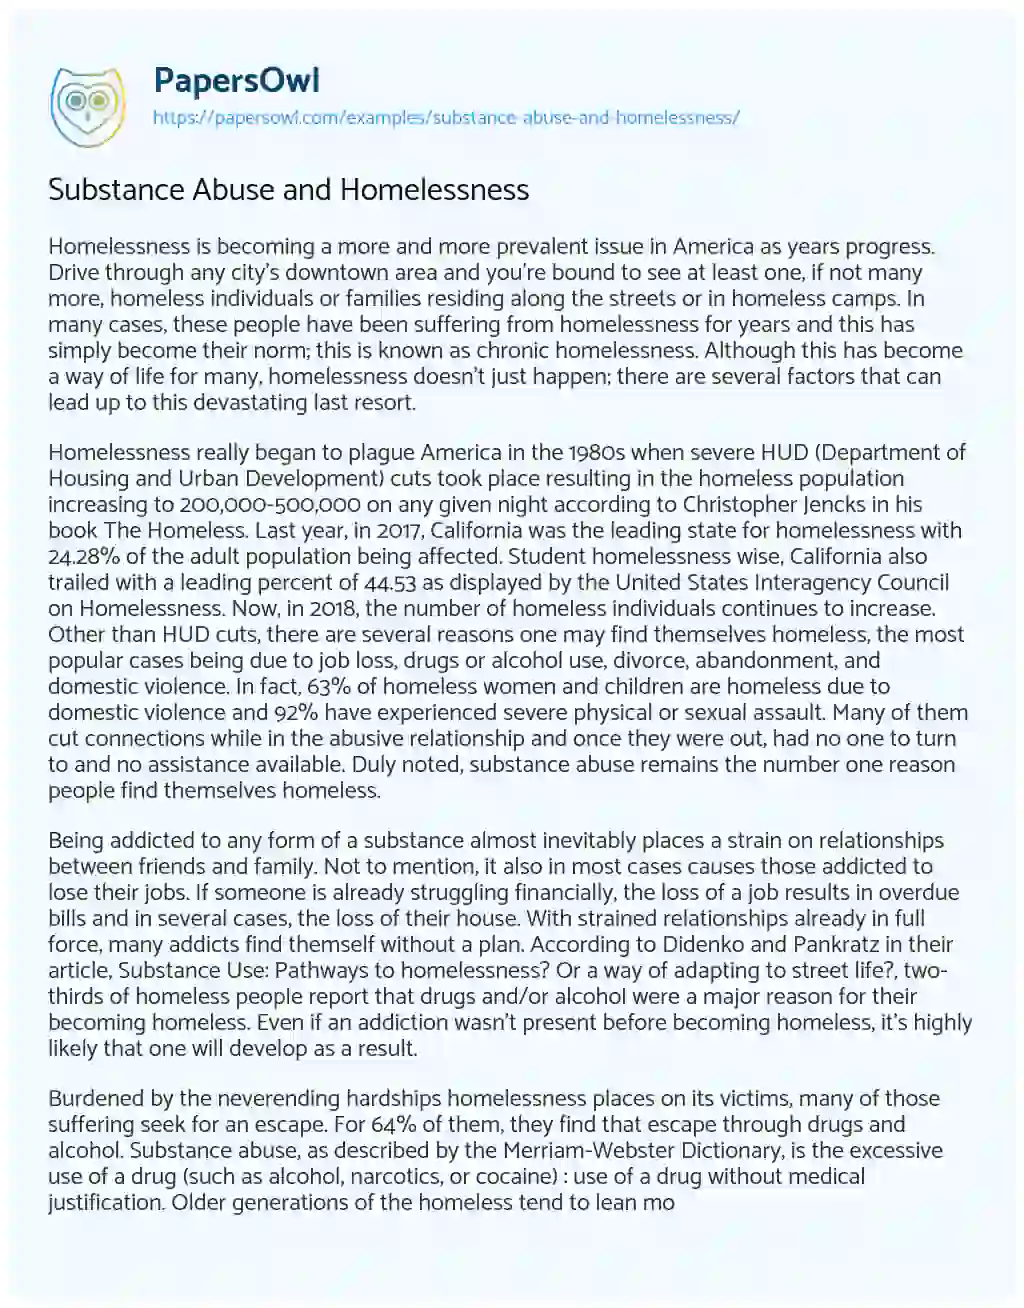 Substance Abuse and Homelessness essay